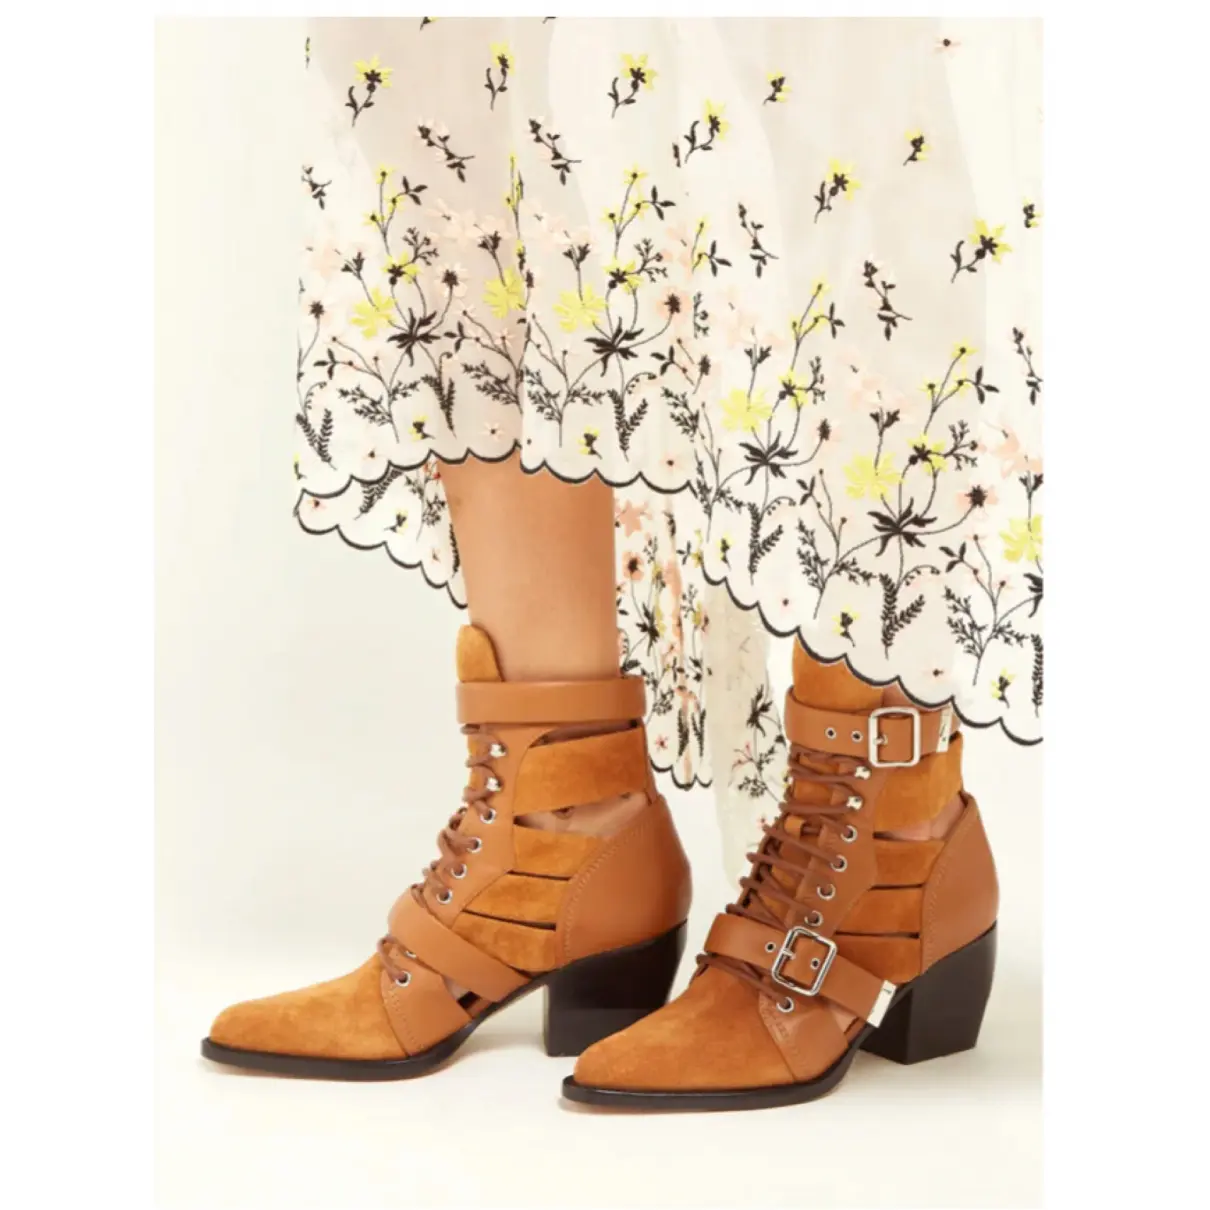 Rylee buckled boots Chloé